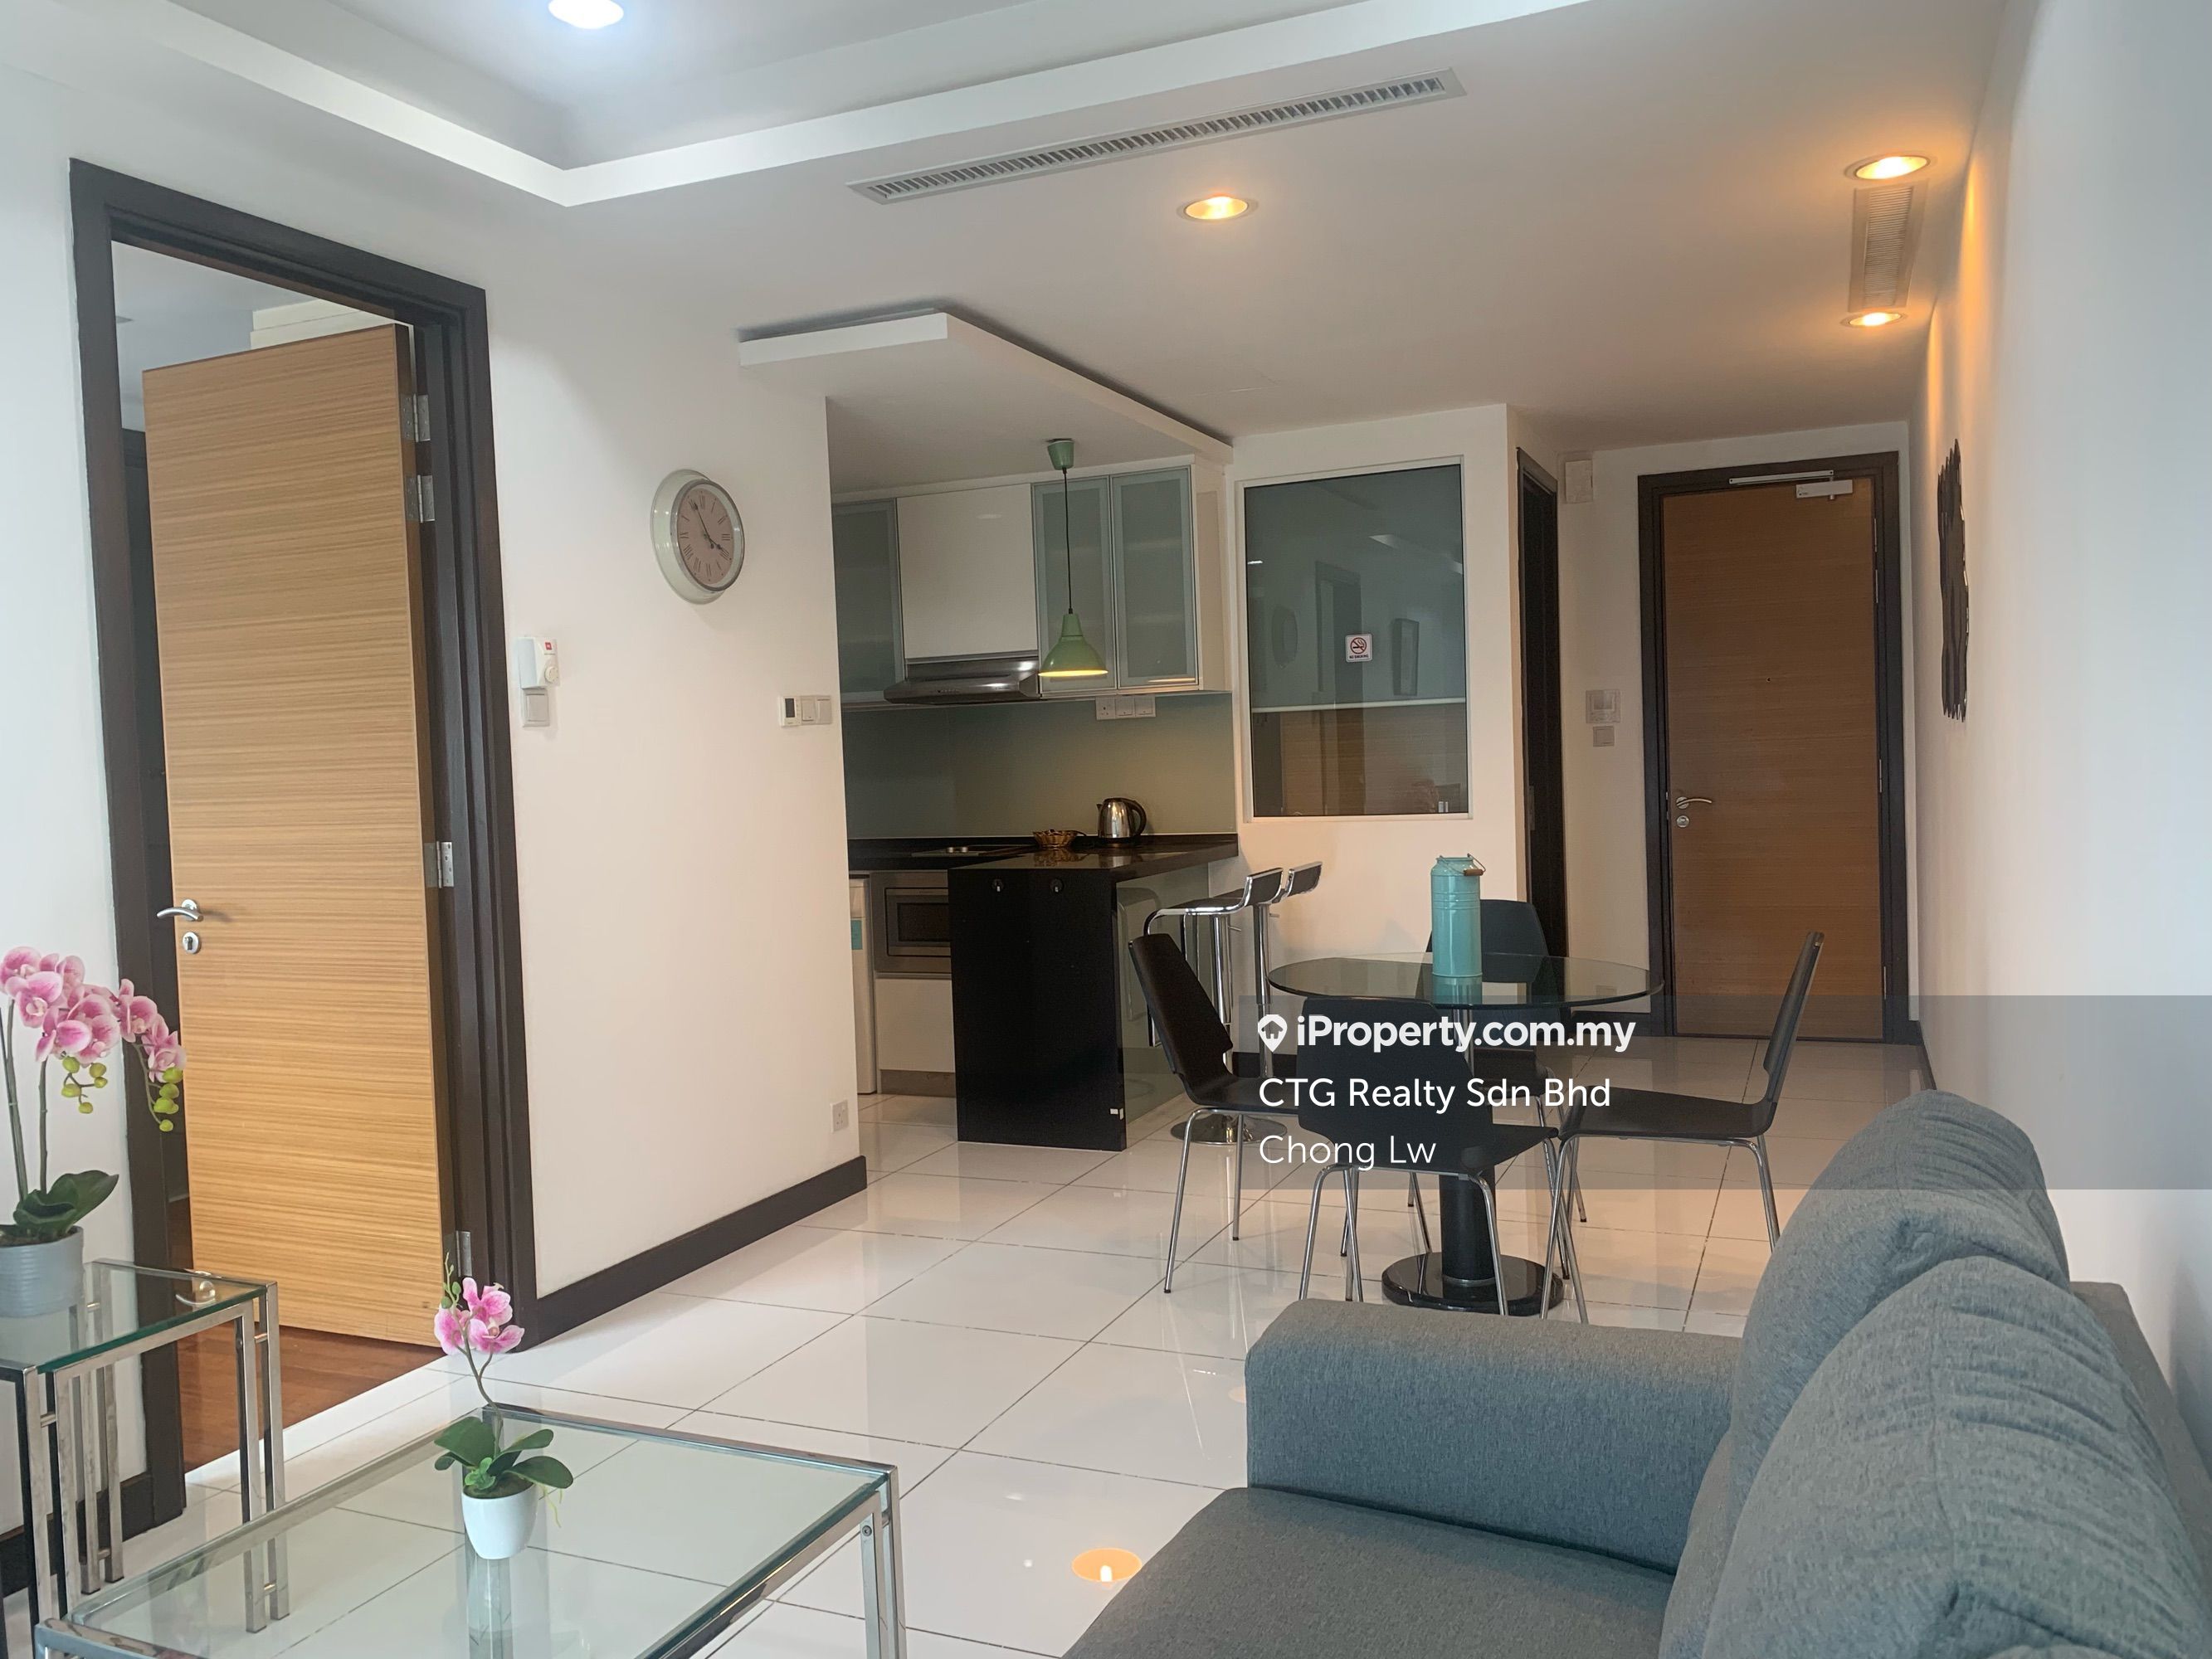 Casa Residency Intermediate Serviced Residence 2 bedrooms for rent in ...